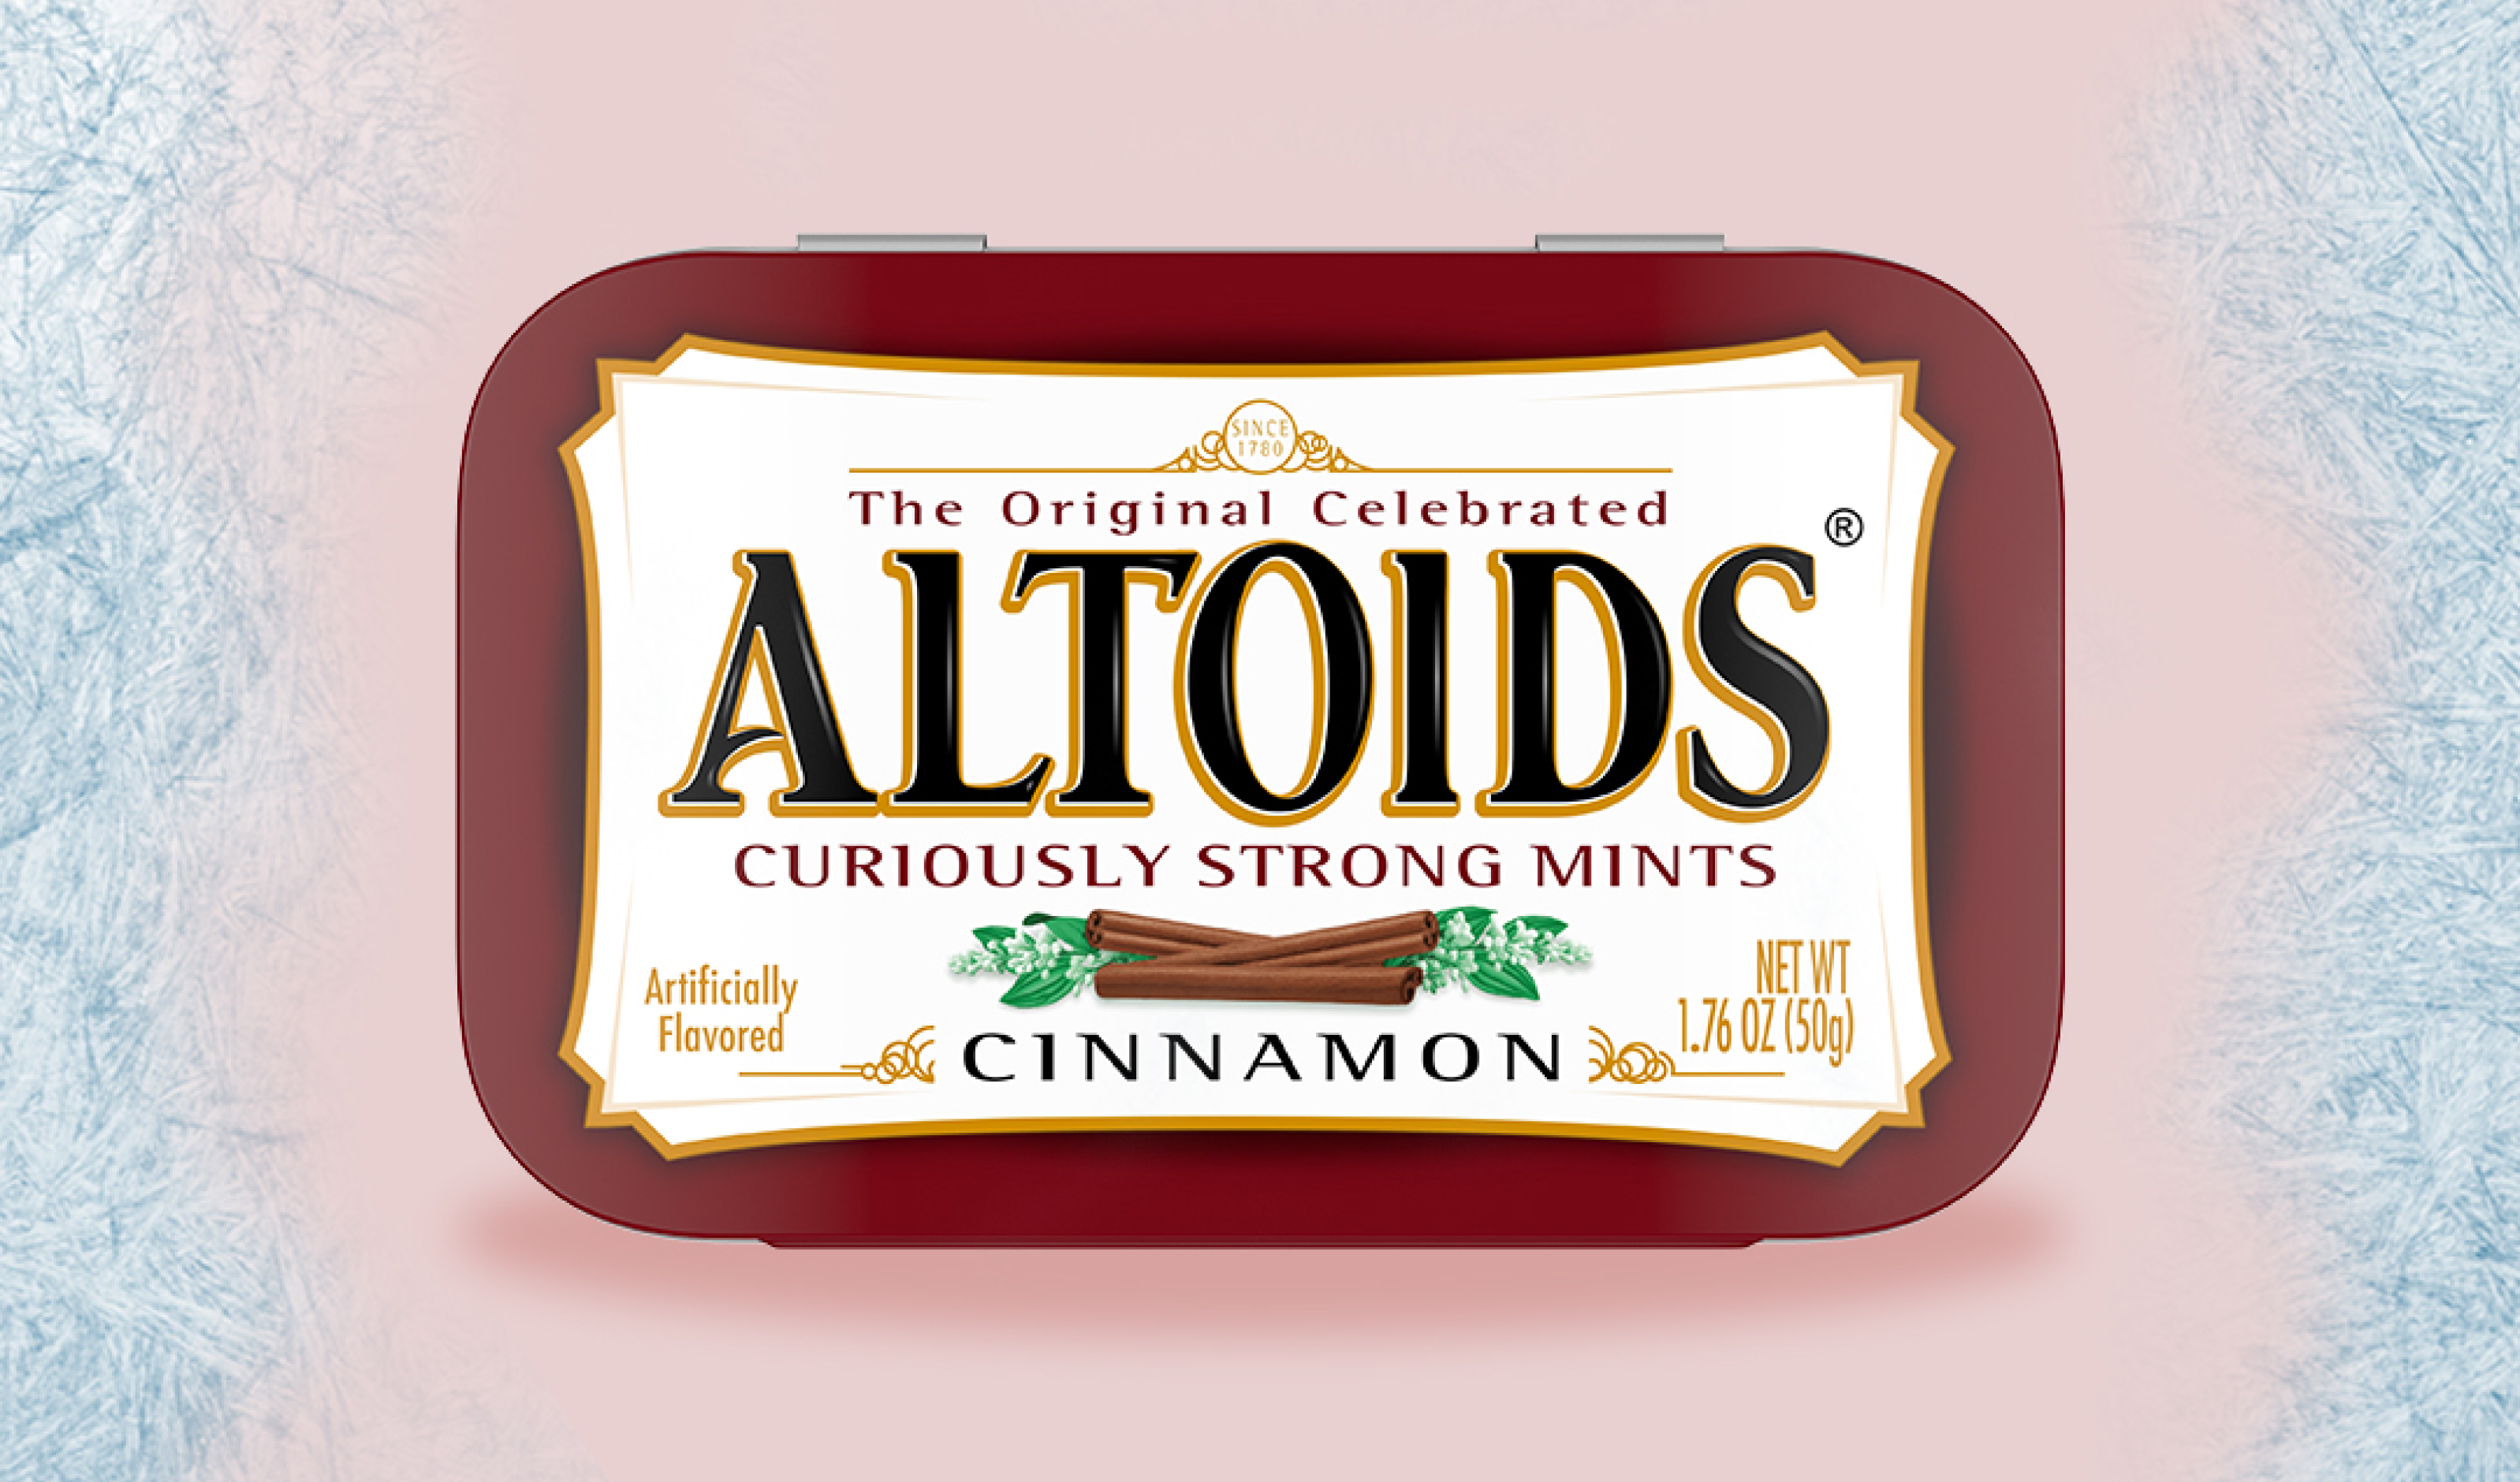 Tin of Cinnamon Altoids on a light pink background with ice graphic on either side